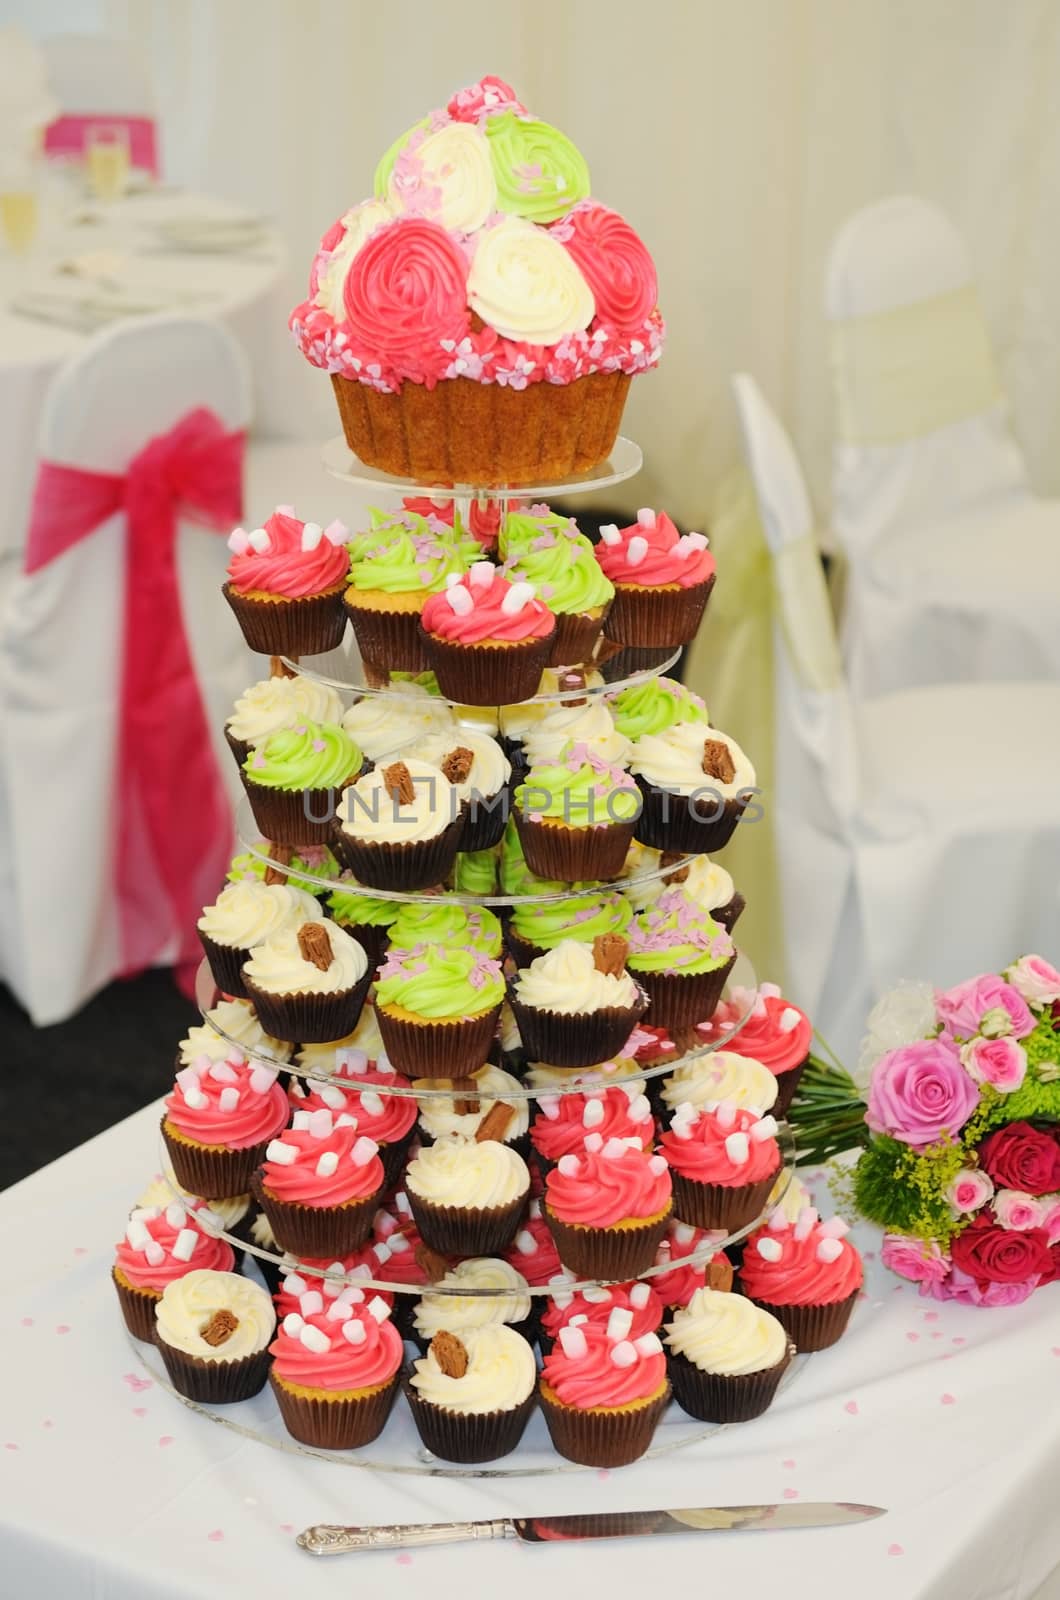 Cup Cakes At wedding by kmwphotography